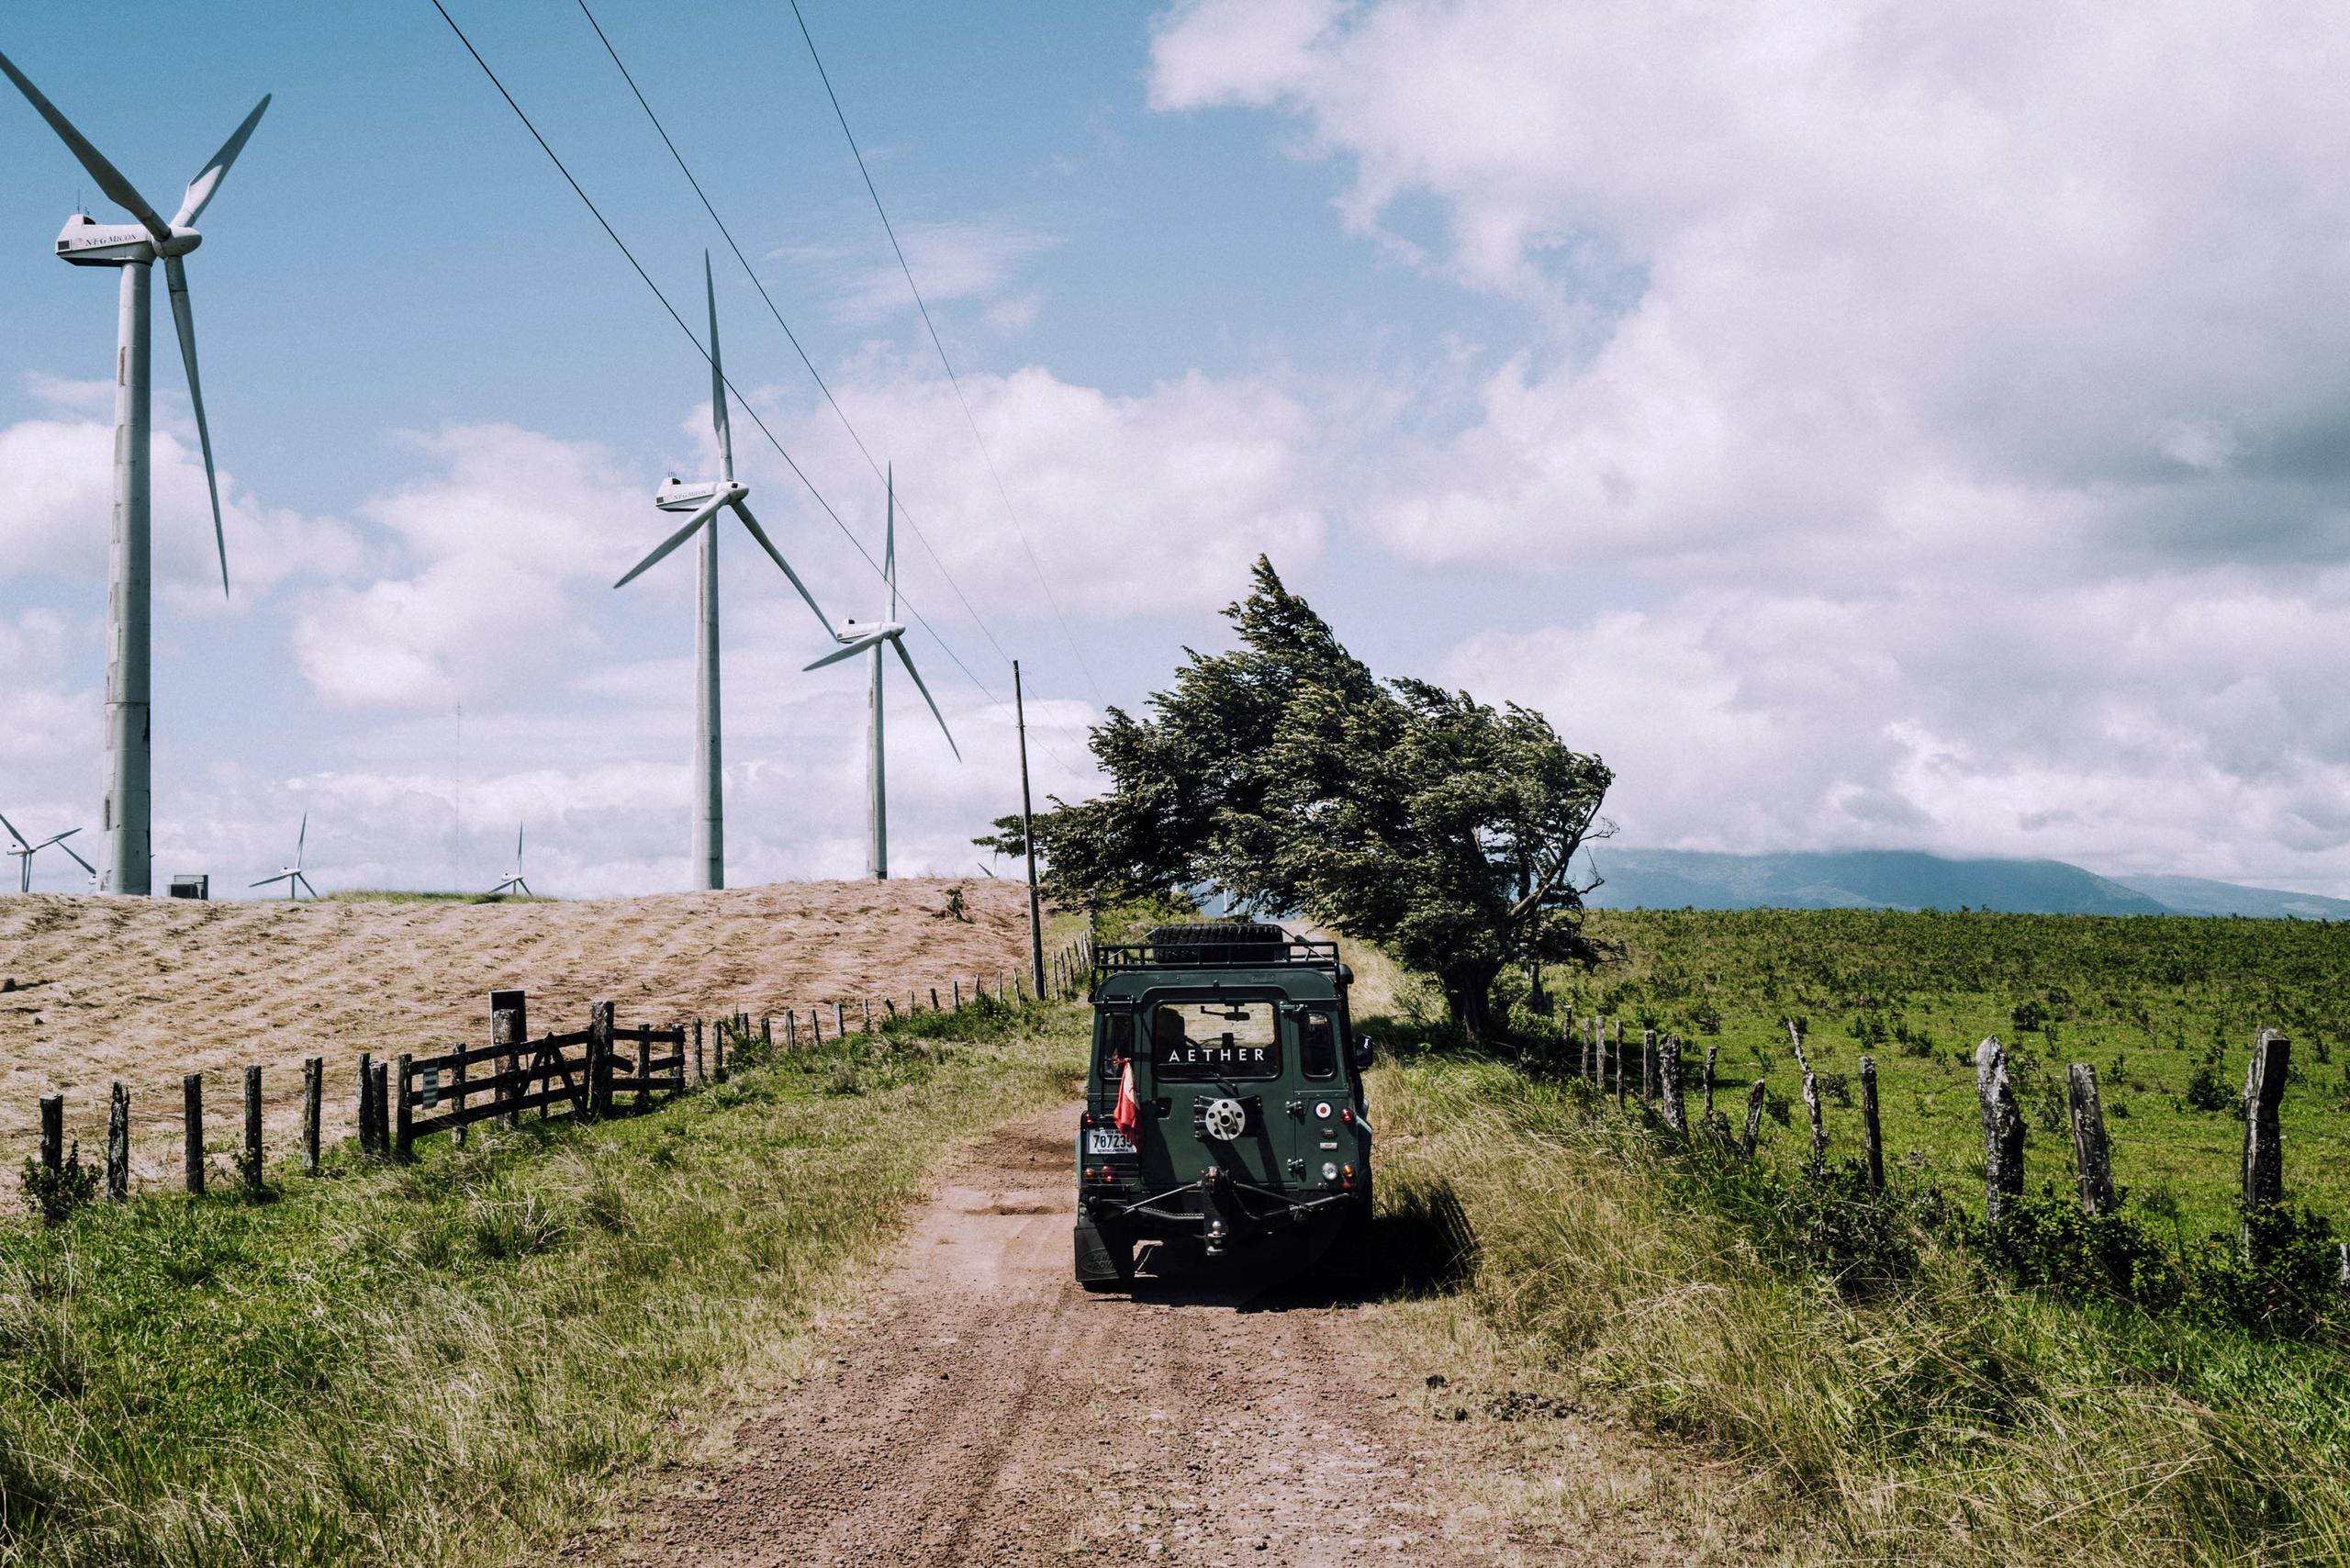 Vintage Land Rover on gravel country road with windmills in background in Costa Rica